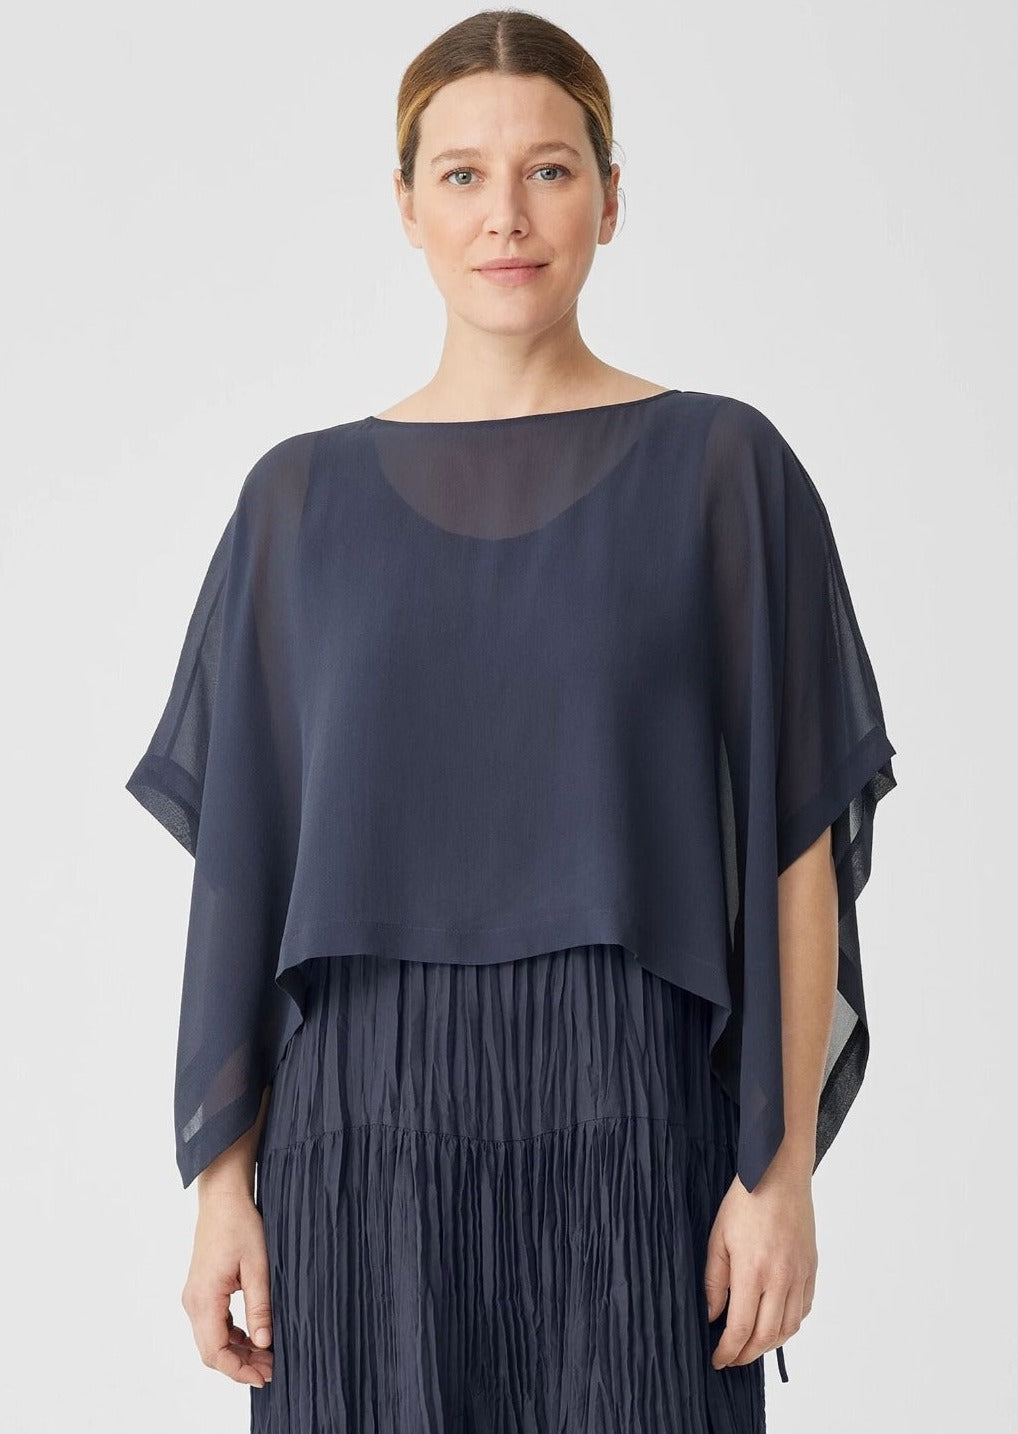 Eileen Fisher - Sheer Silk Cropped Georgette Poncho